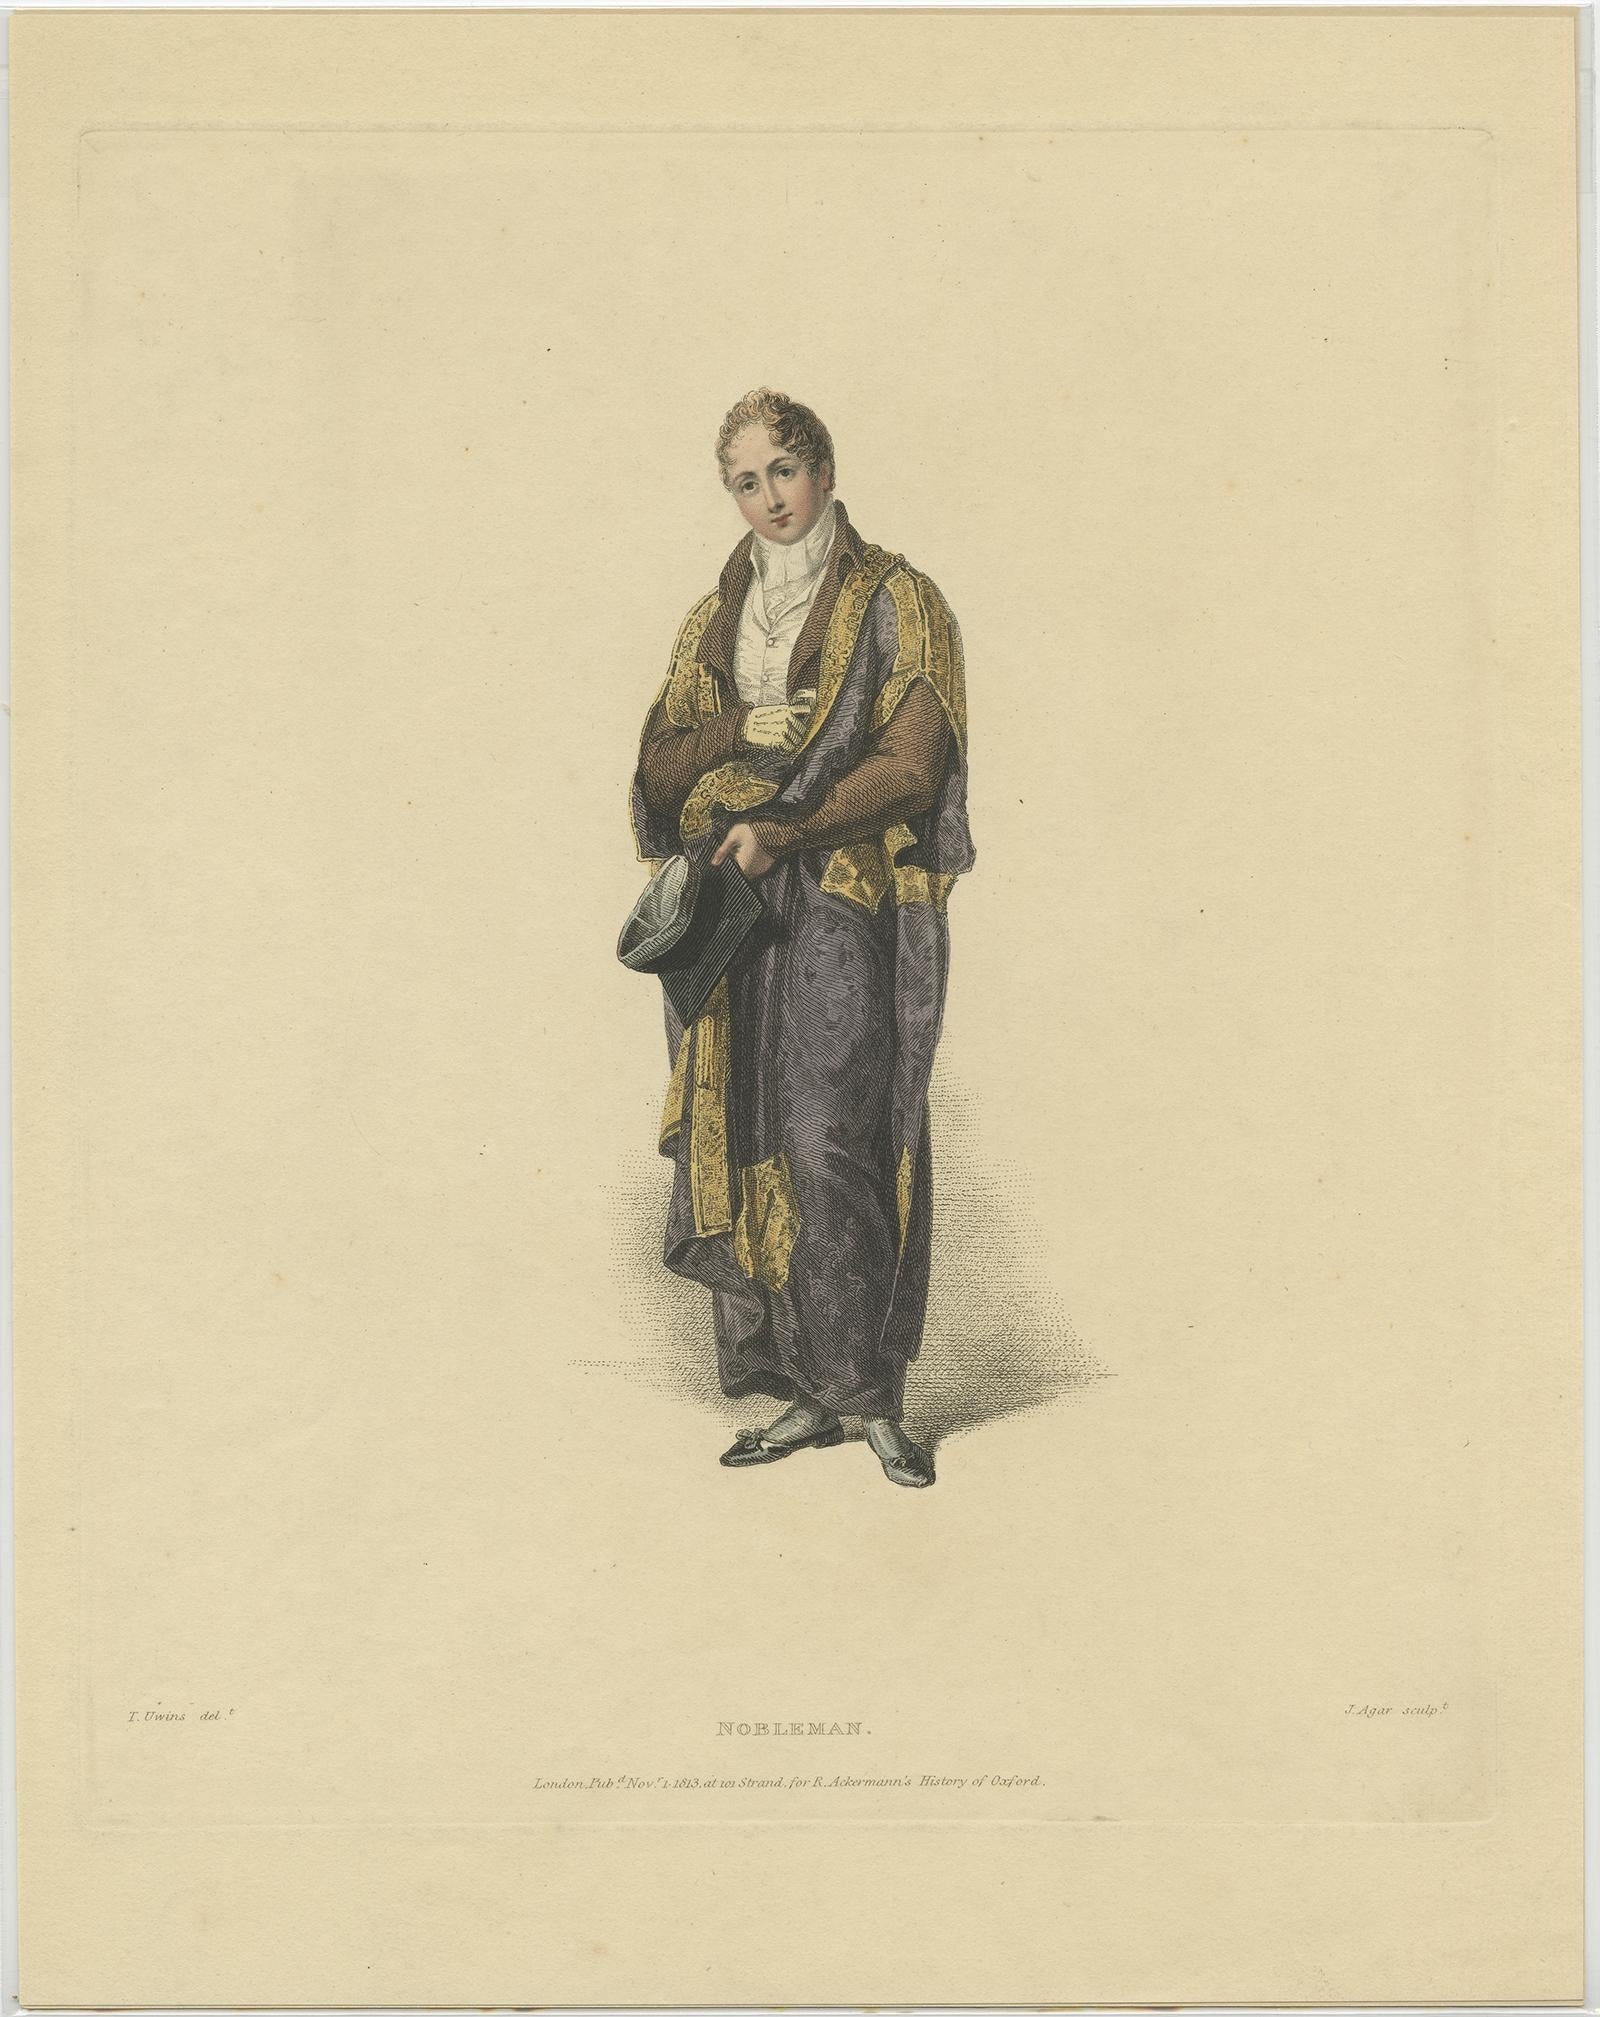 Antique print titled 'Nobleman'. Portrait of a nobleman, Lord Belgrave, made after a drawing by Thomas Uwins. 

This print originates from 'Ackermann's History of Oxford and History of Cambridge'. 

Artists and Engravers: Printed for R. Ackermann,